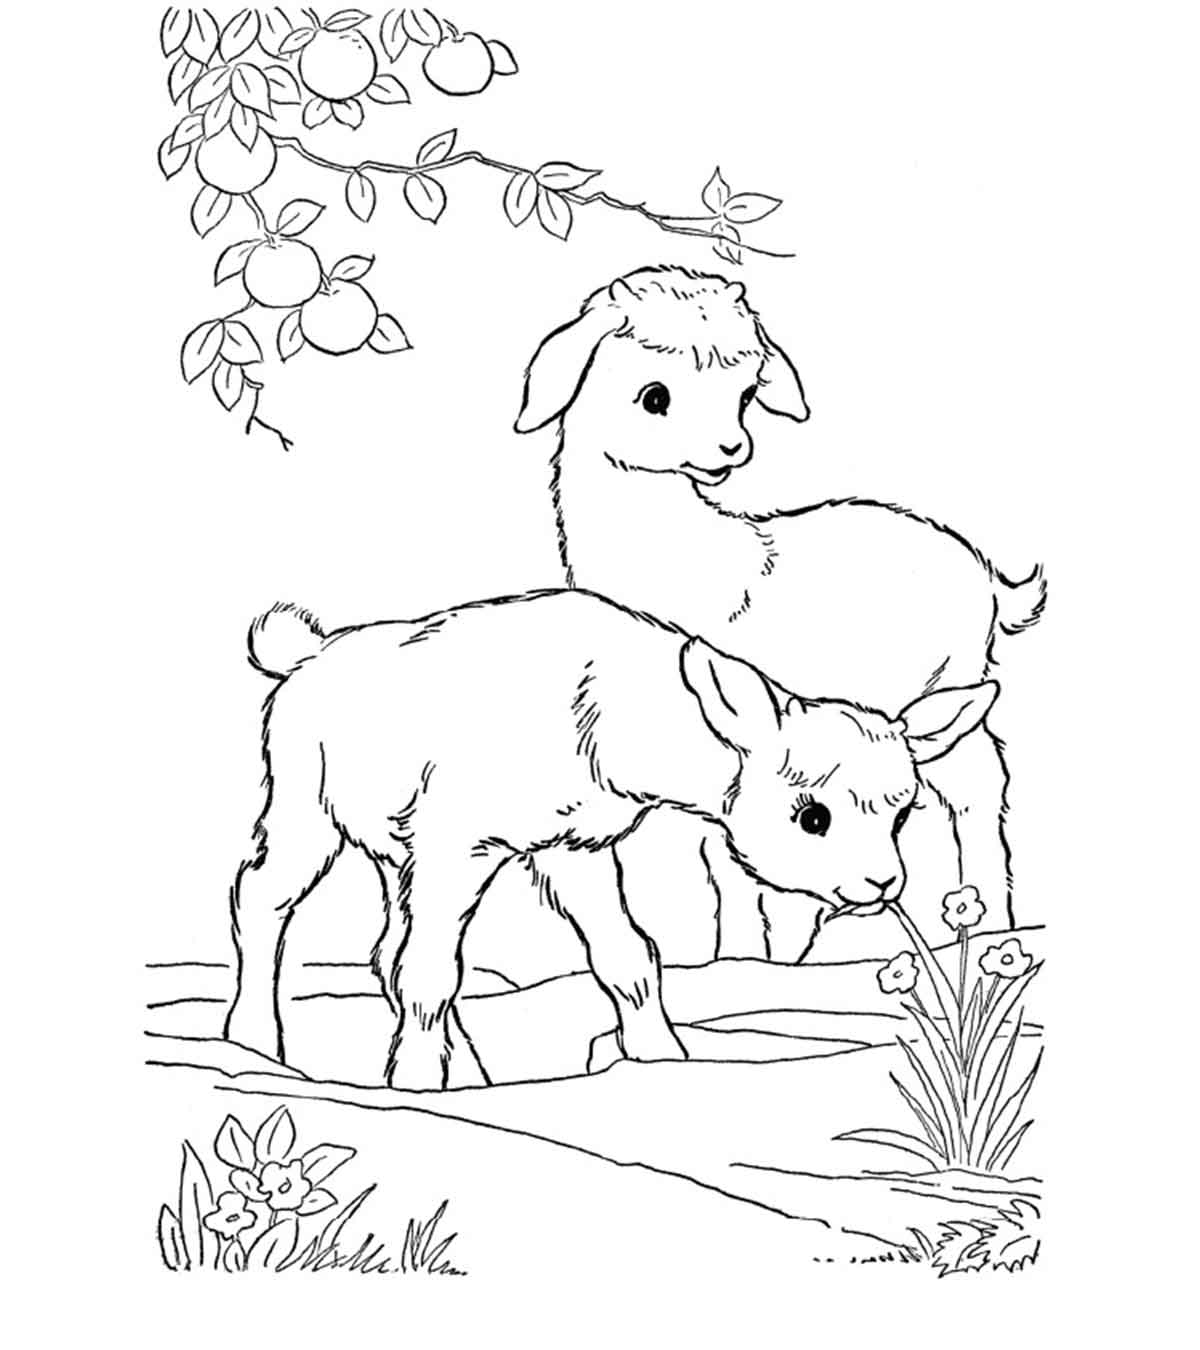 Animal Coloring Pages - MomJunction